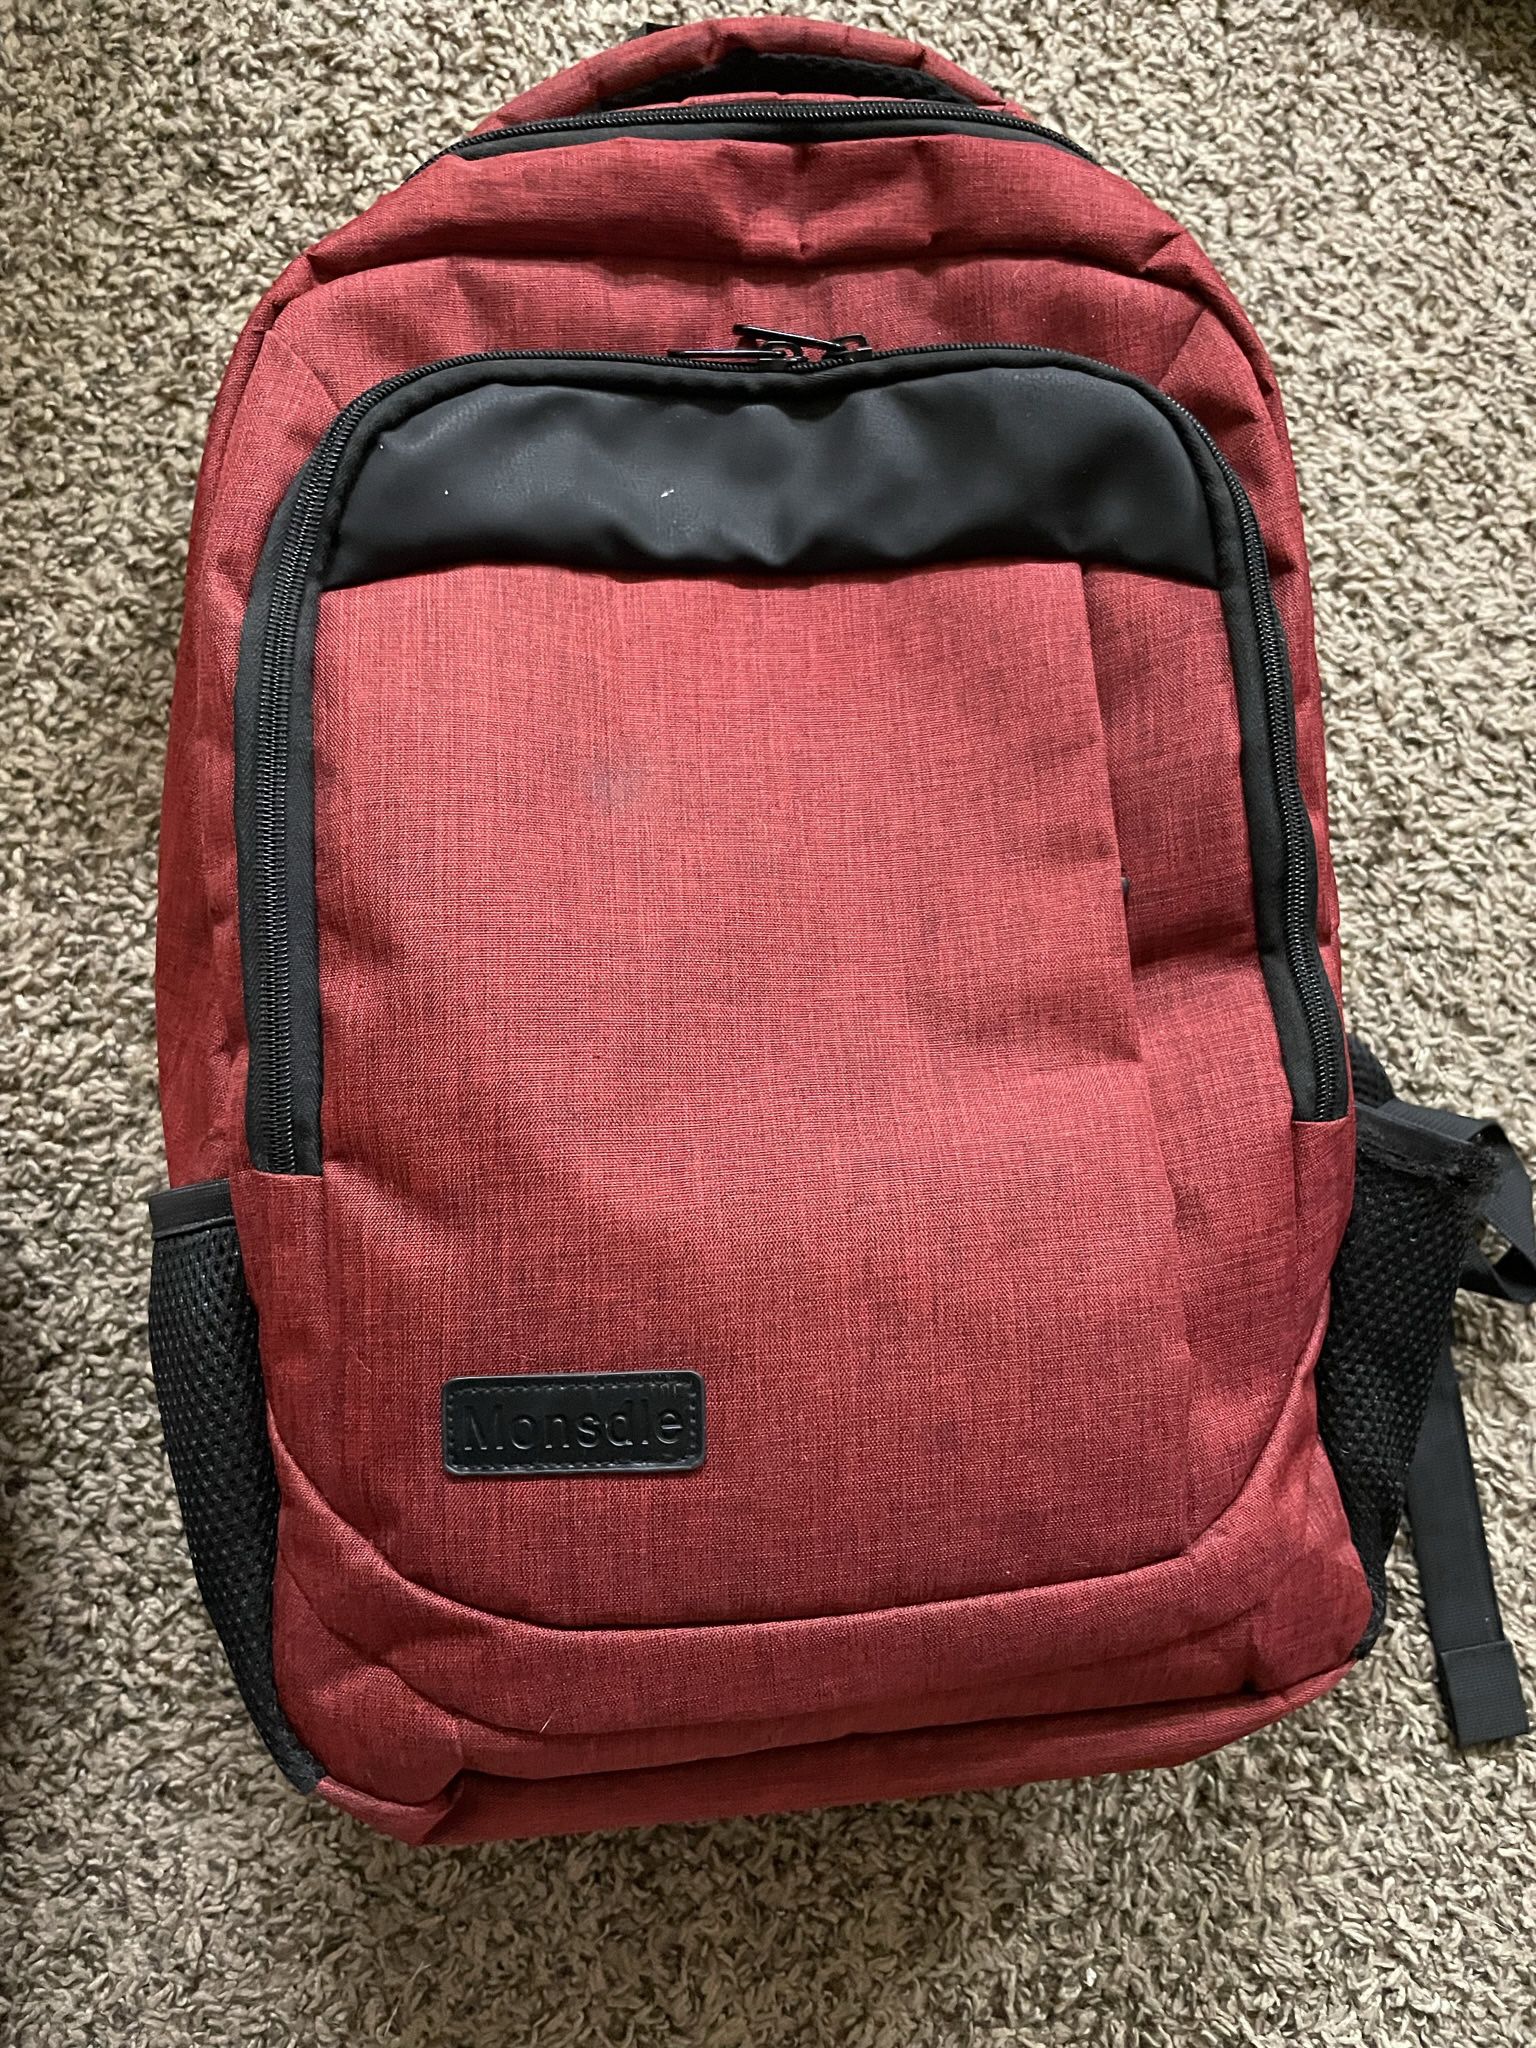 Monsdle Red Laptop  Backpack